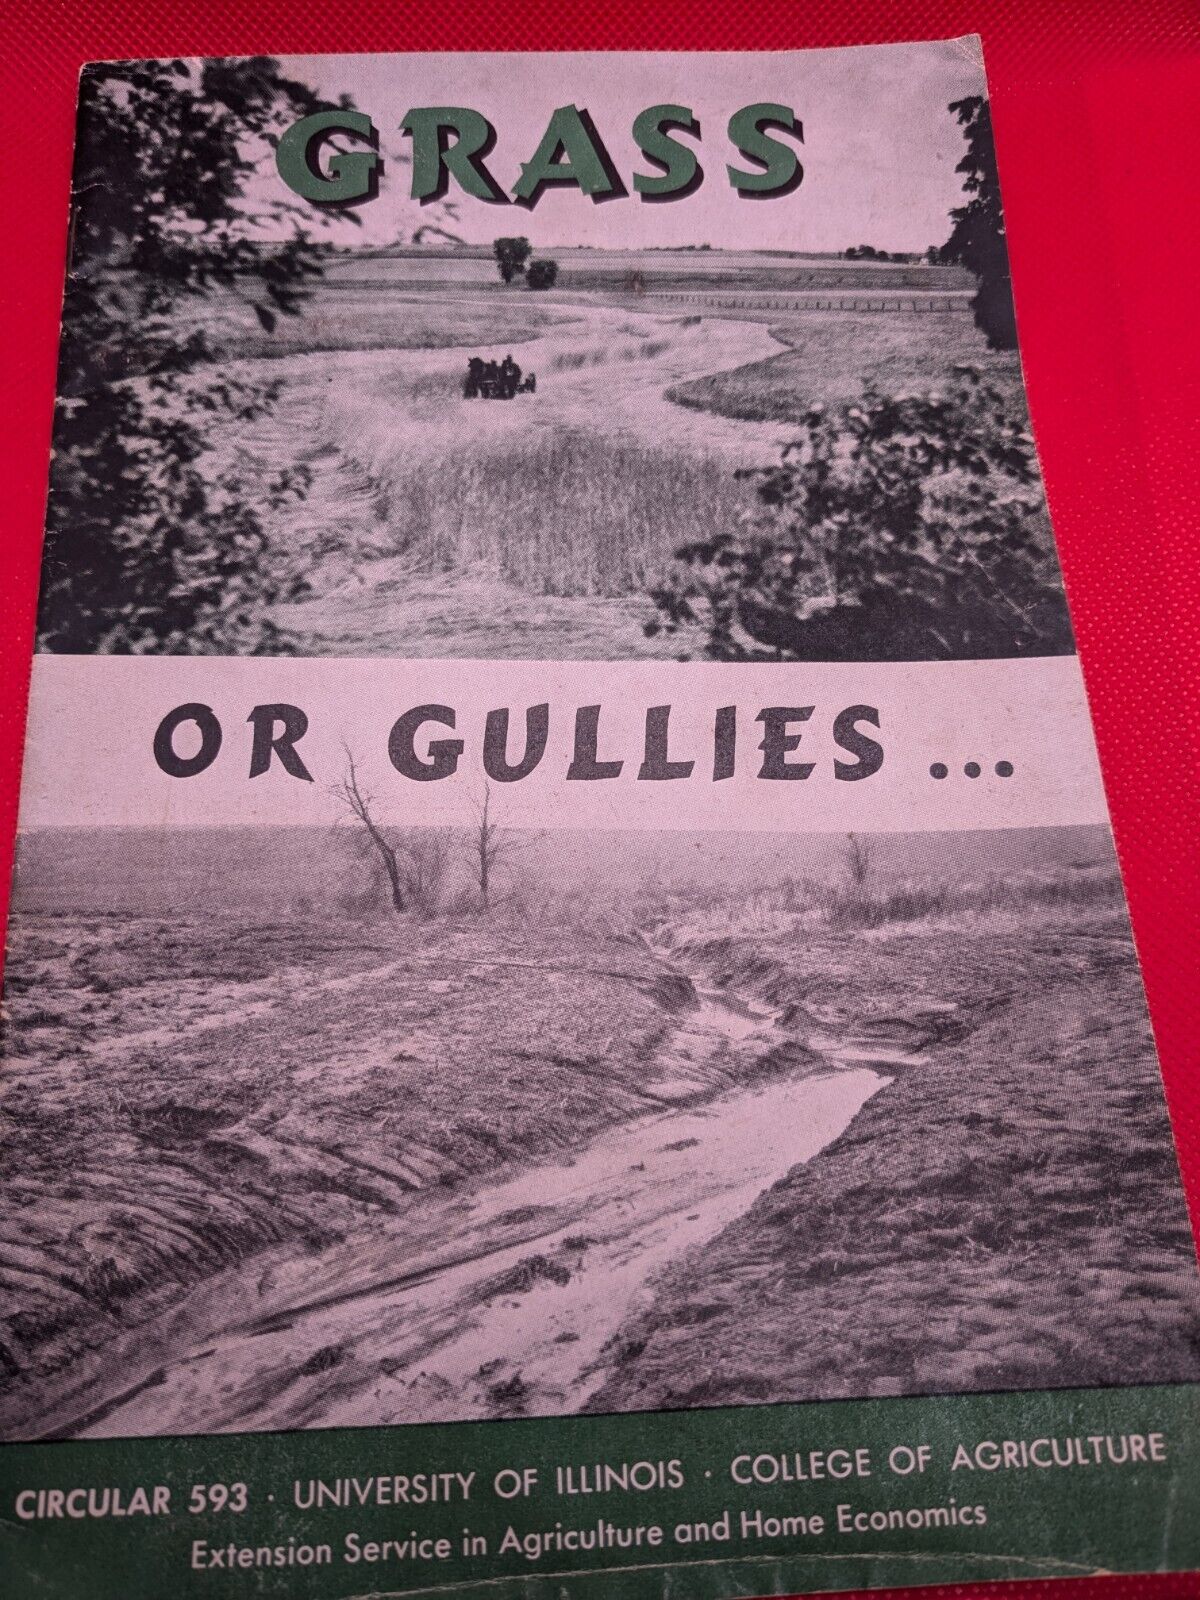 Univ. of Illinois College of Agriculture Circular 593 Grass or Gullies (1945)